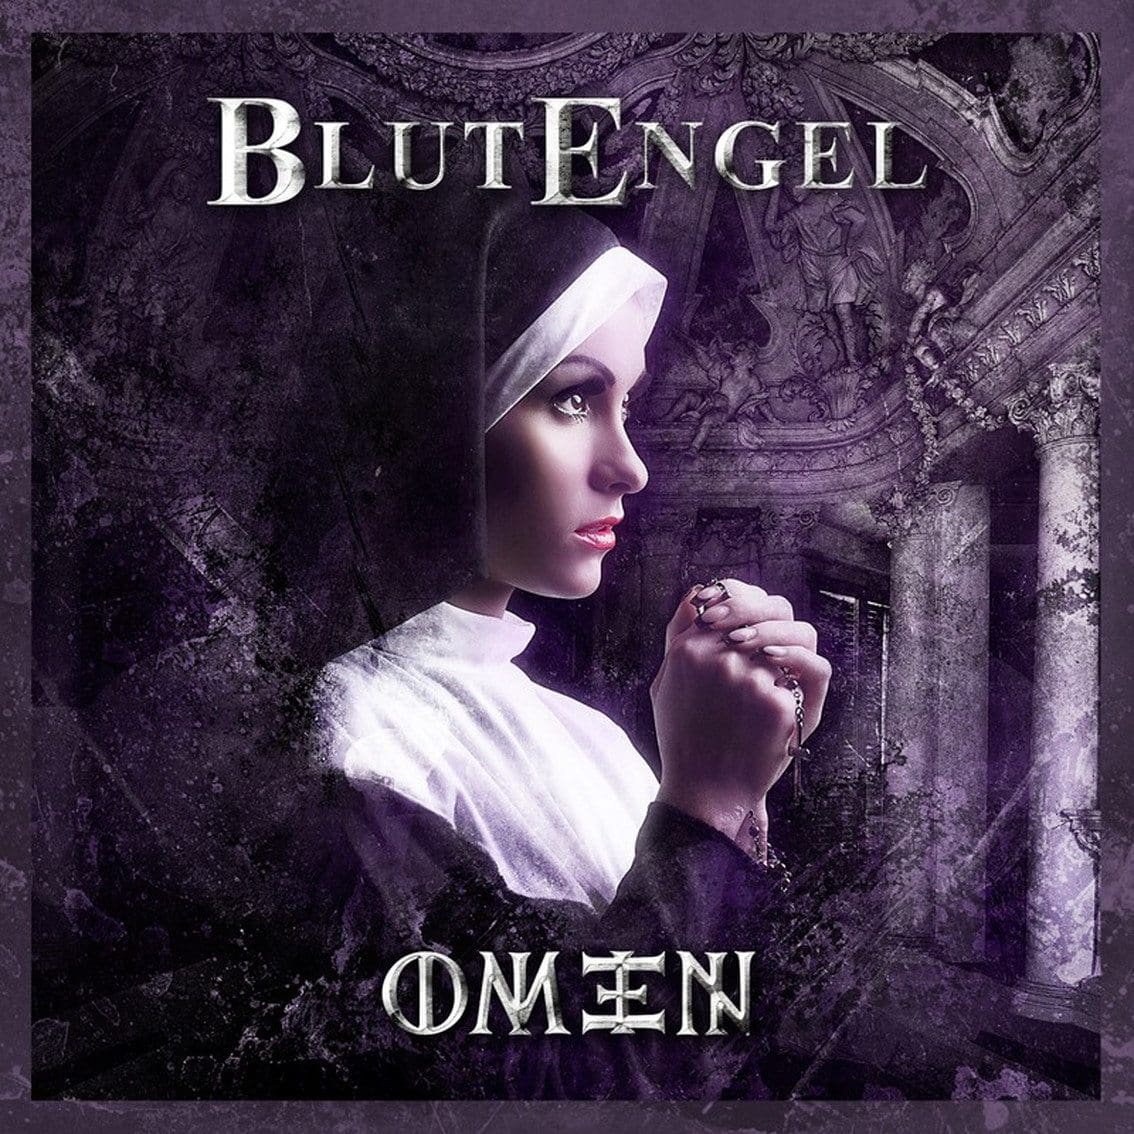 Blutengel forced to rename 'Open' album to 'Save Us' due to legal dispute